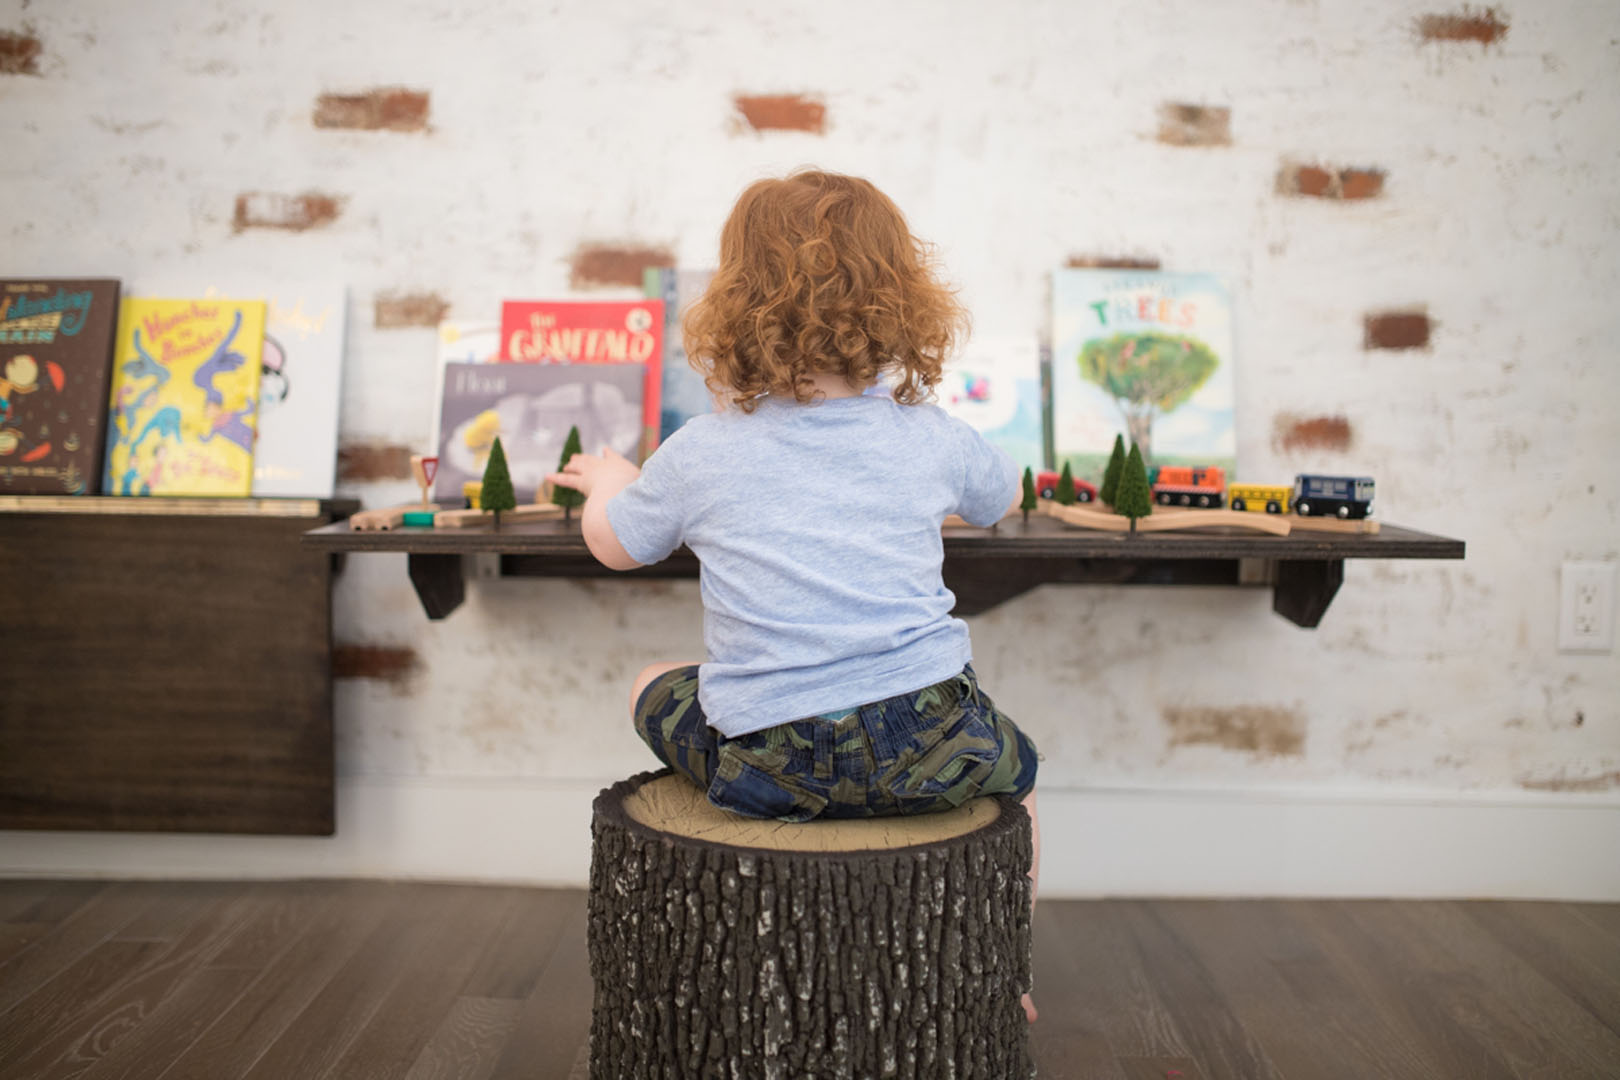 Little girl sitting on a standing log as a chair at a wall desk, the wall is decorated with childrens books and toys